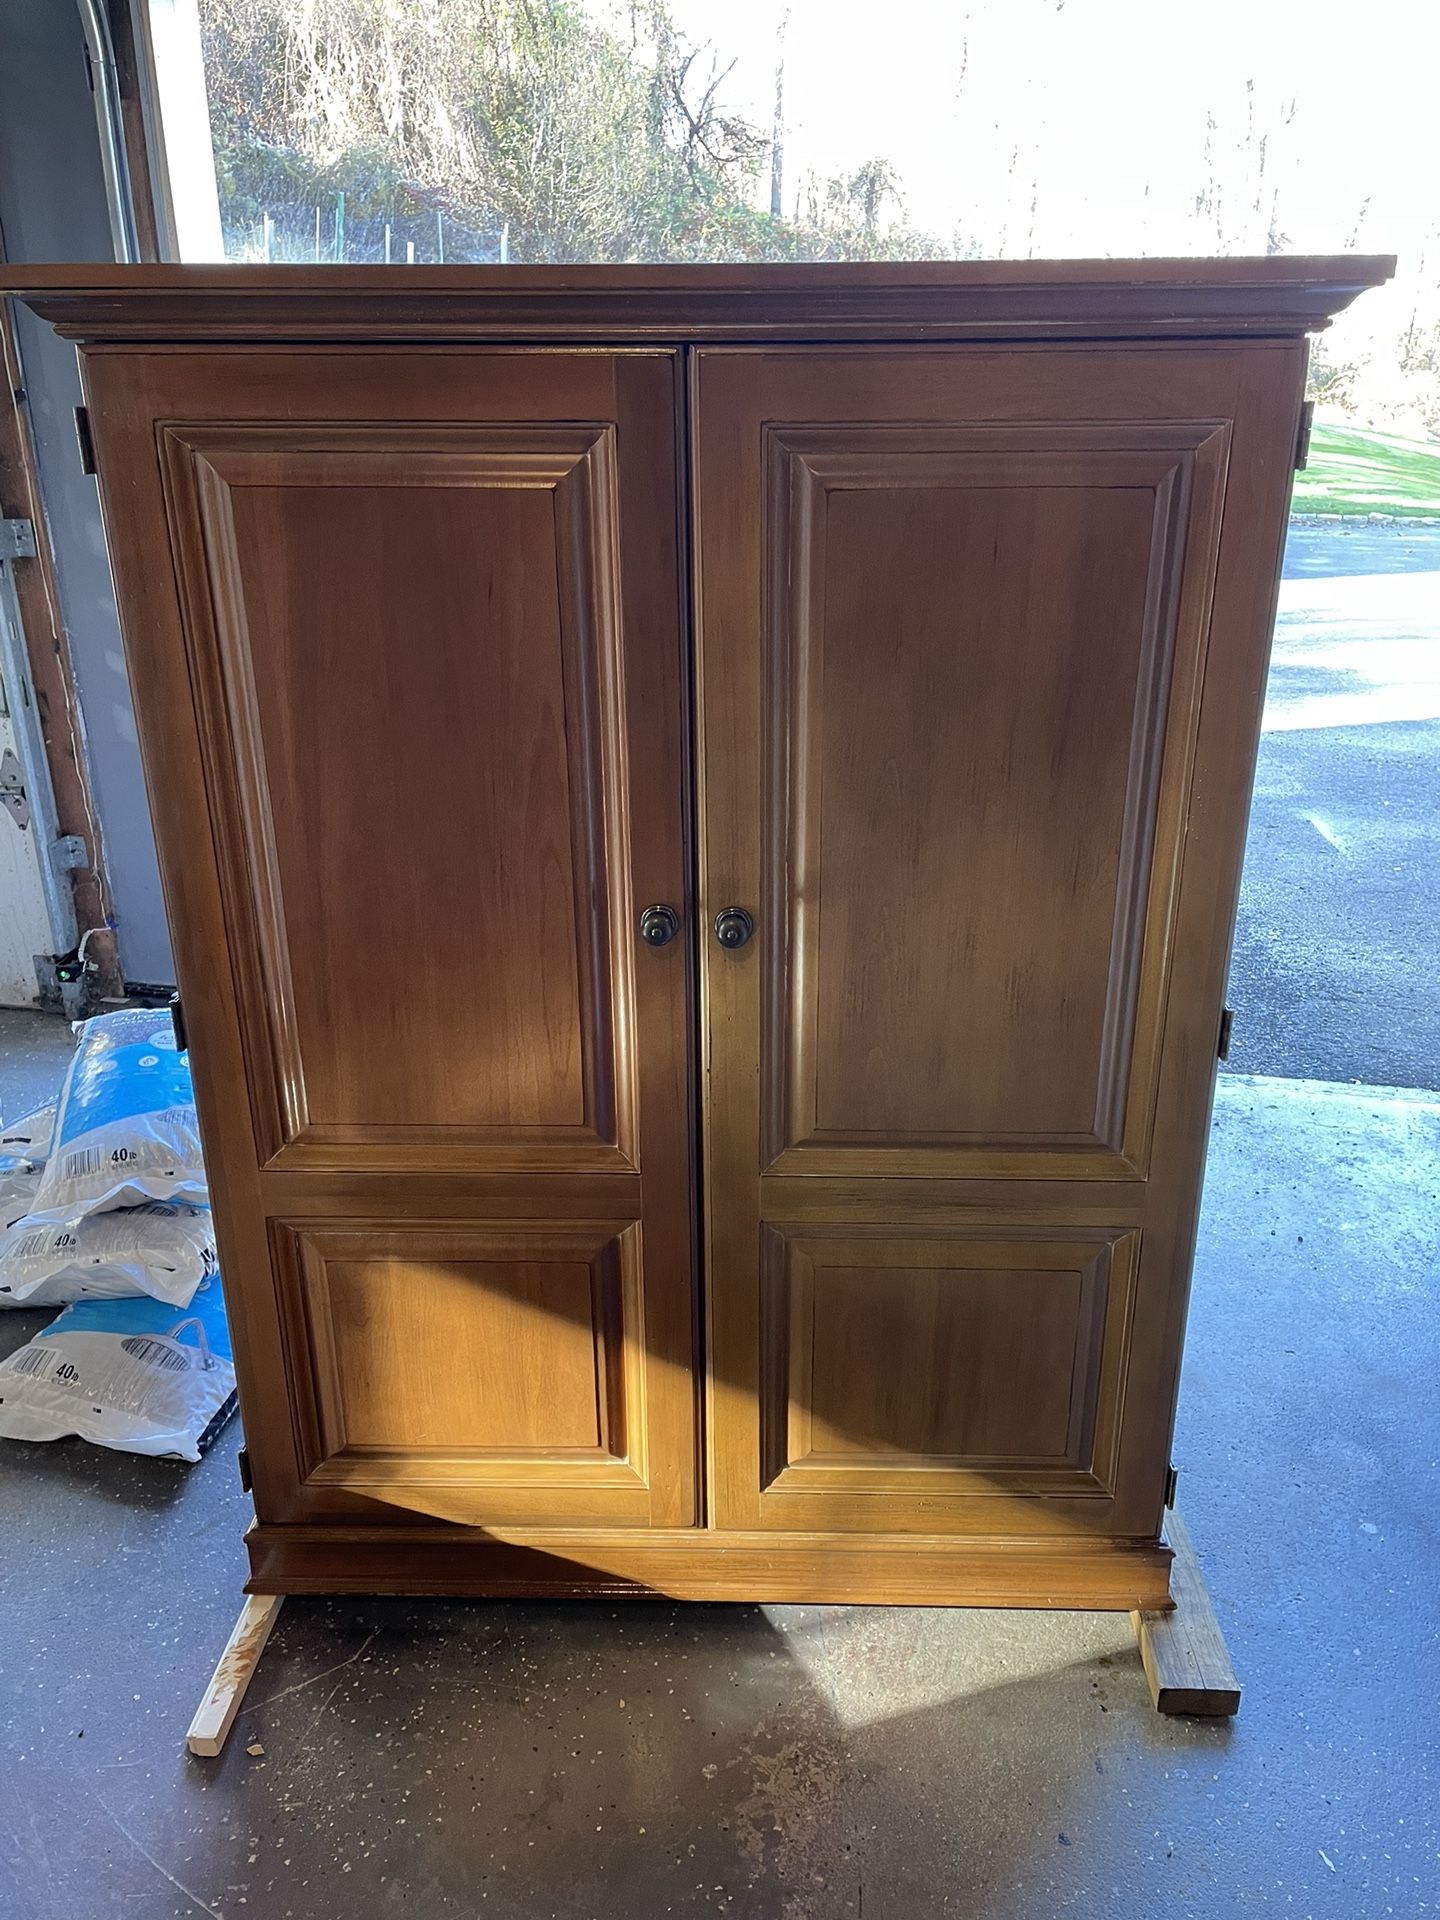 Armoire 63 High 46 Wide. $75